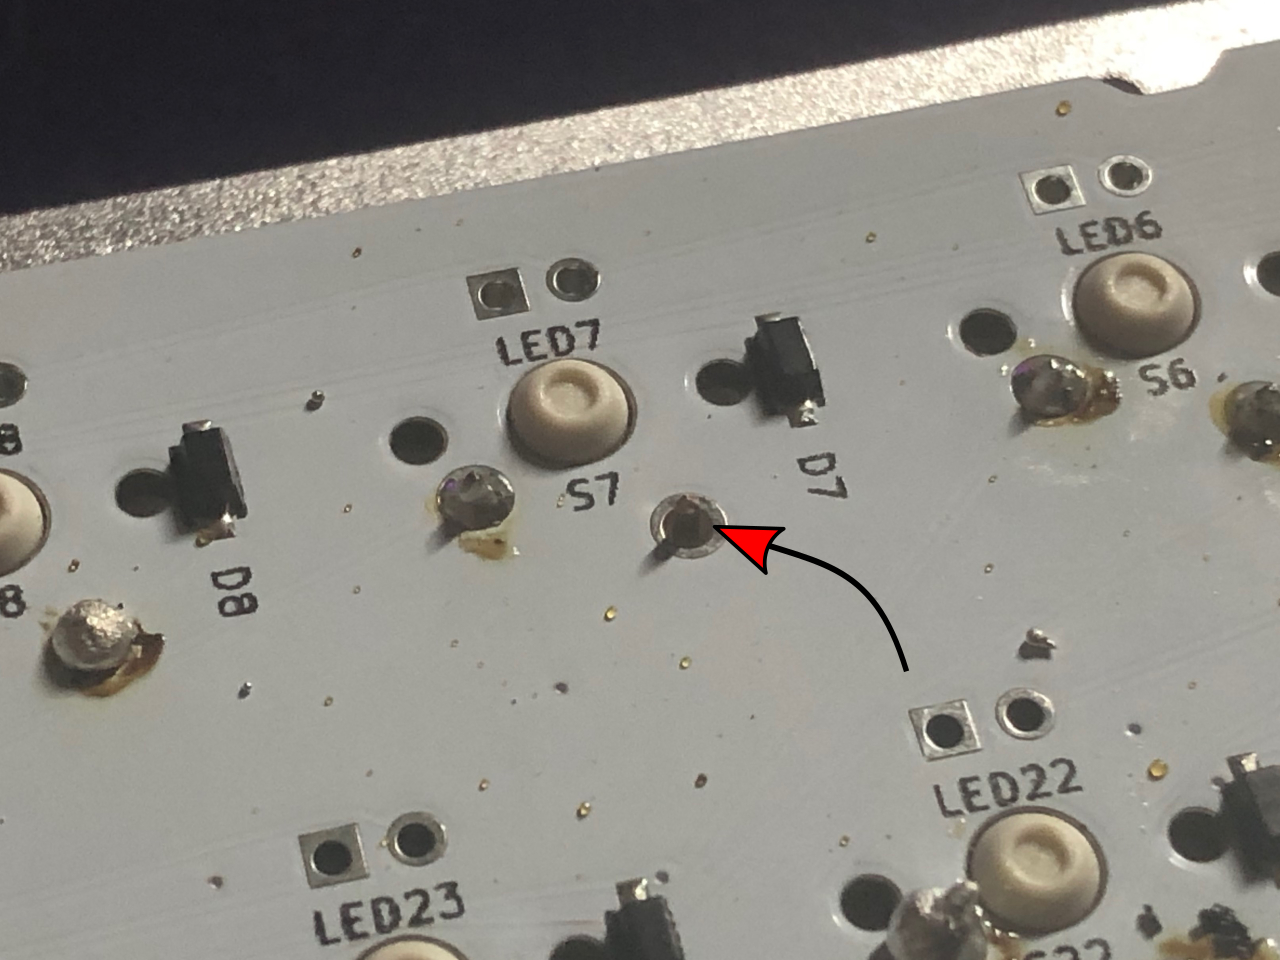 Back of PCB with an arrow pointing to an un-soldered pin next to the label S7